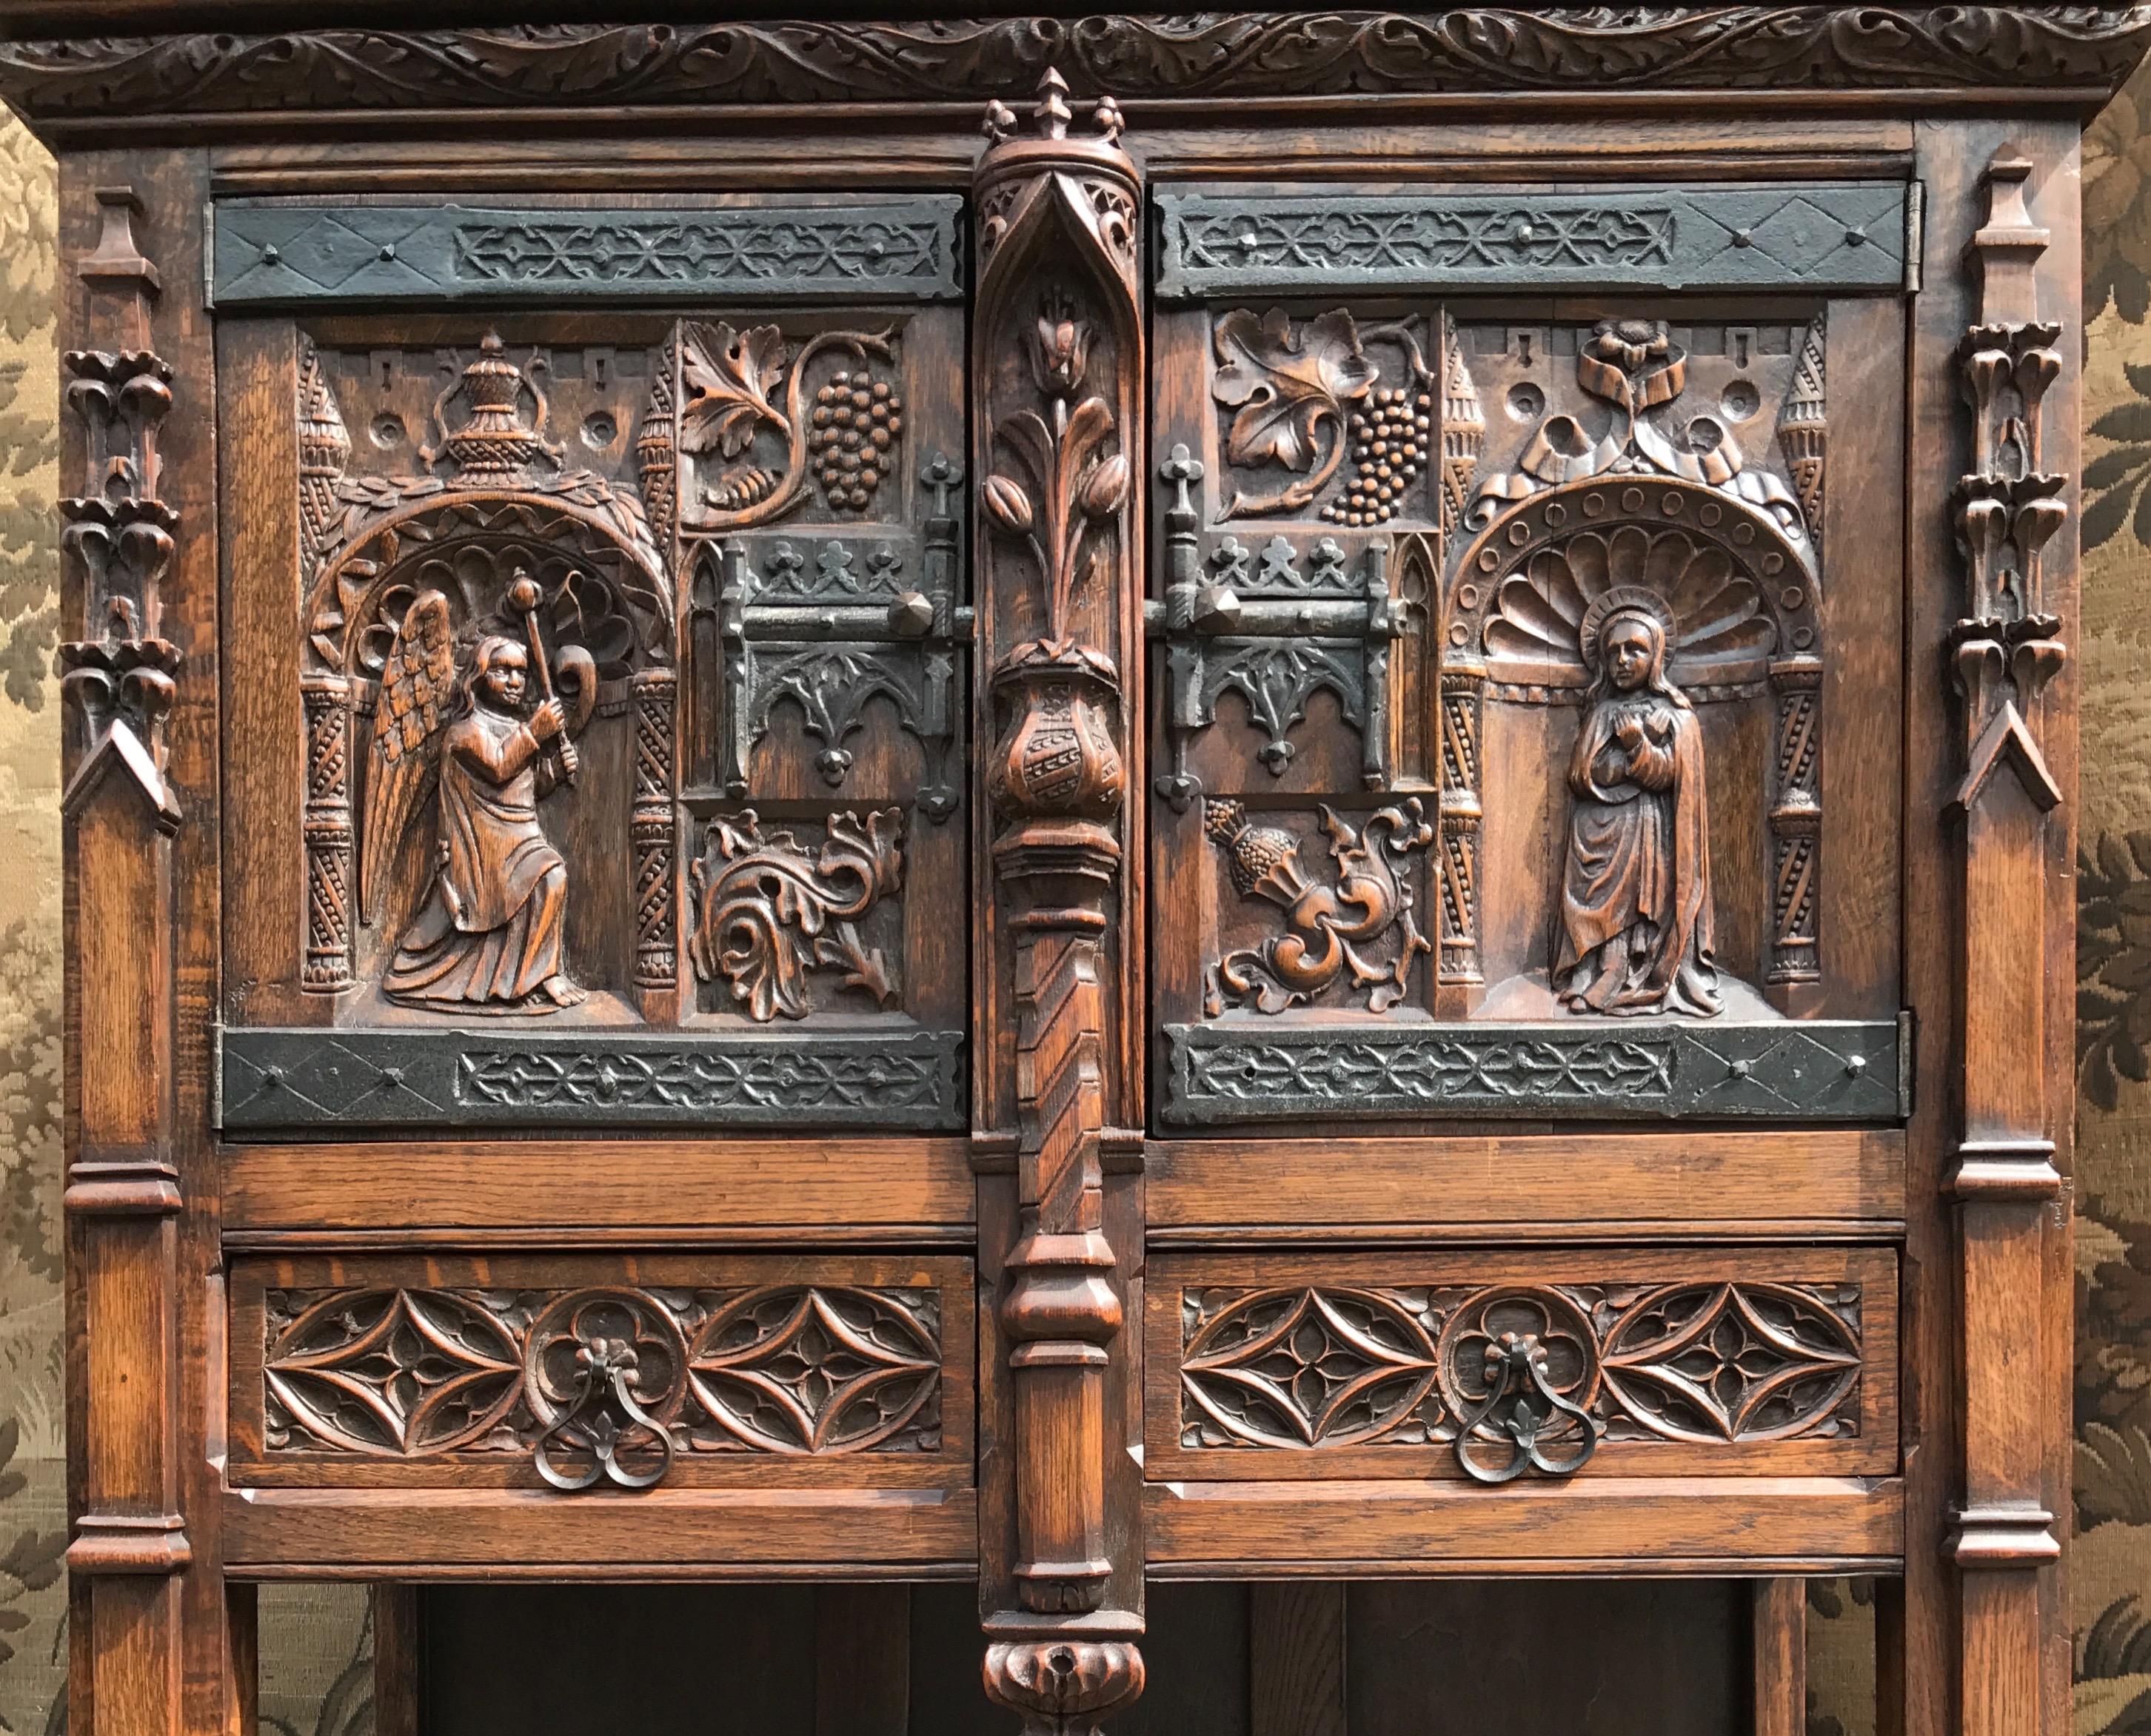 Marvelous and practical Gothic Revival, religious cabinet. 

You may never again get to see and purchase a Gothic Revival cabinet with more carved details than this wonderfully handcrafted example. This unique, Dutch Gothic cabinet in oak has an